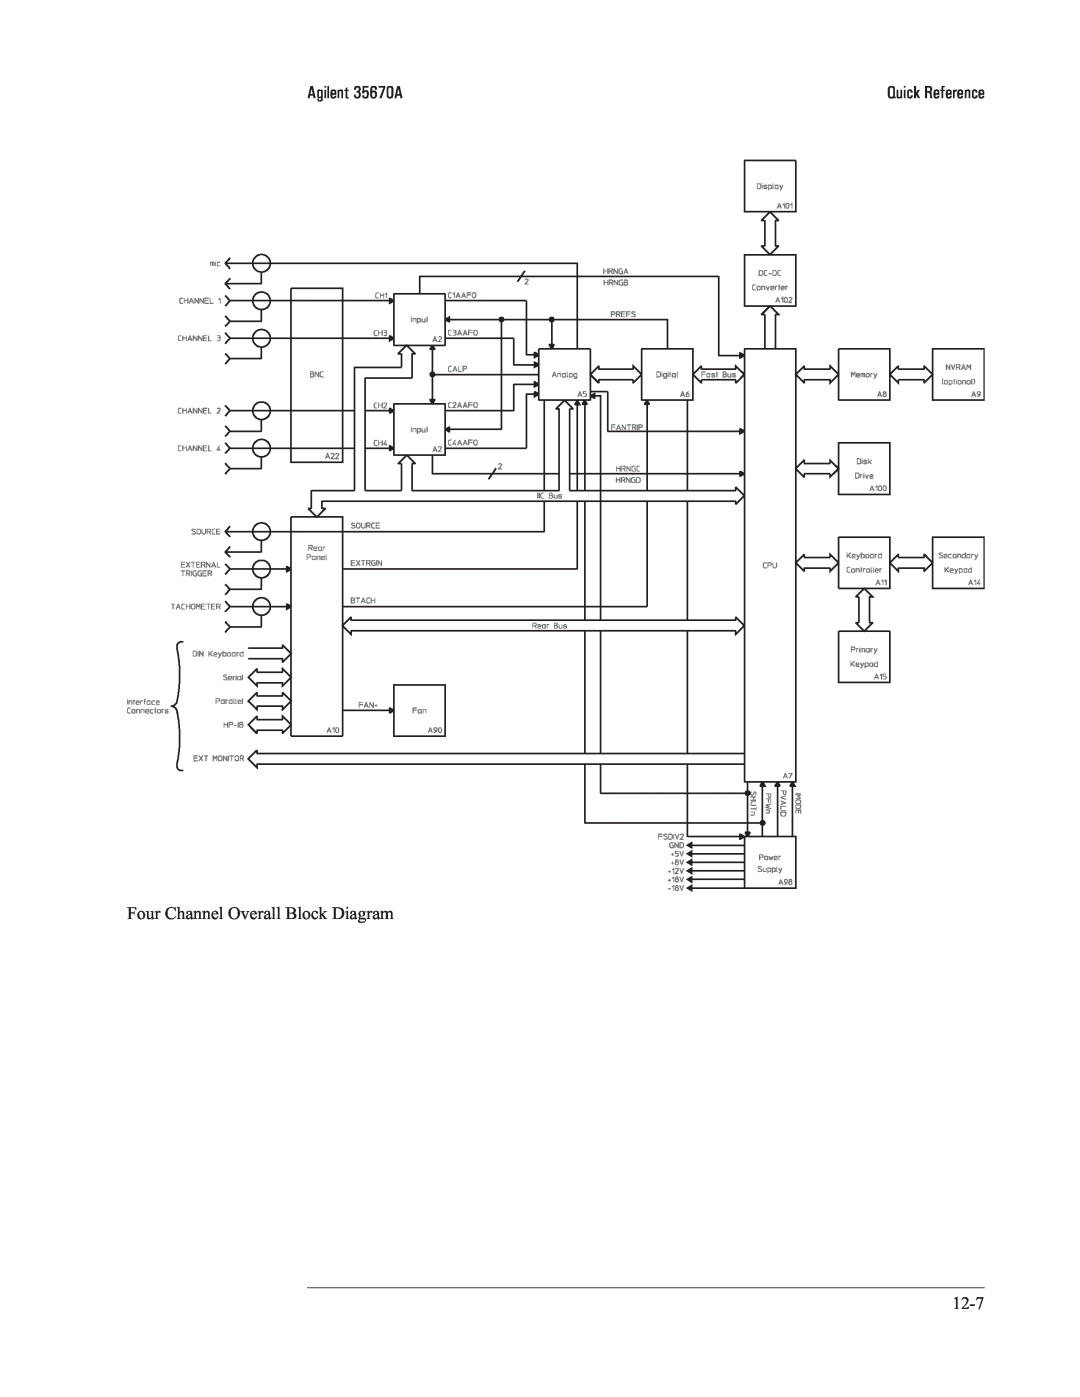 Agilent Technologies 35670-90066 manual Agilent 35670A, Four Channel Overall Block Diagram, Quick Reference 